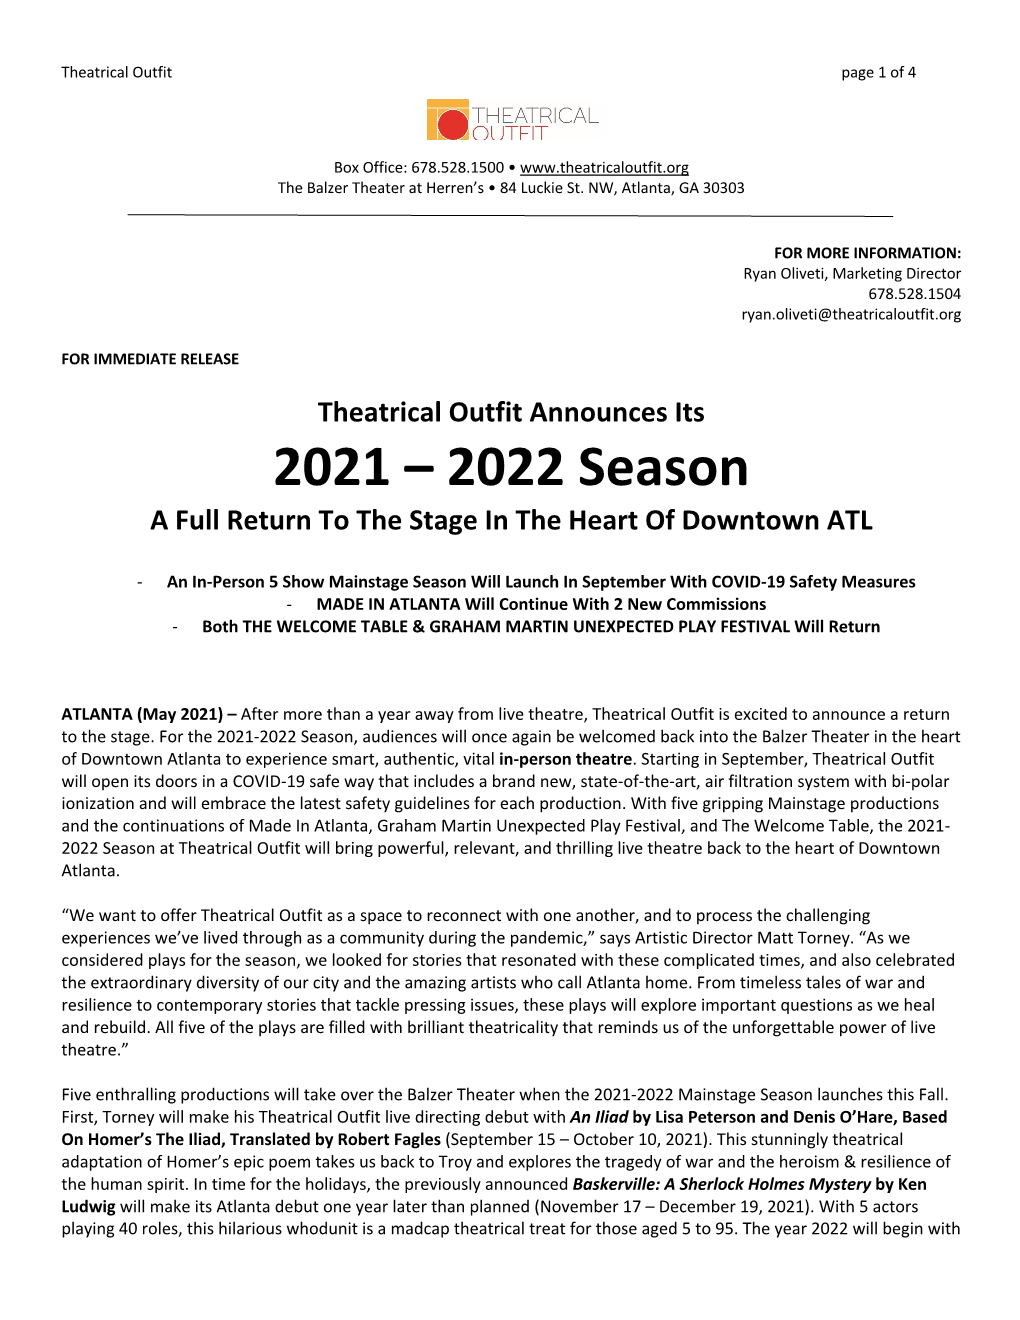 To Read All About the 2021 – 2022 Season